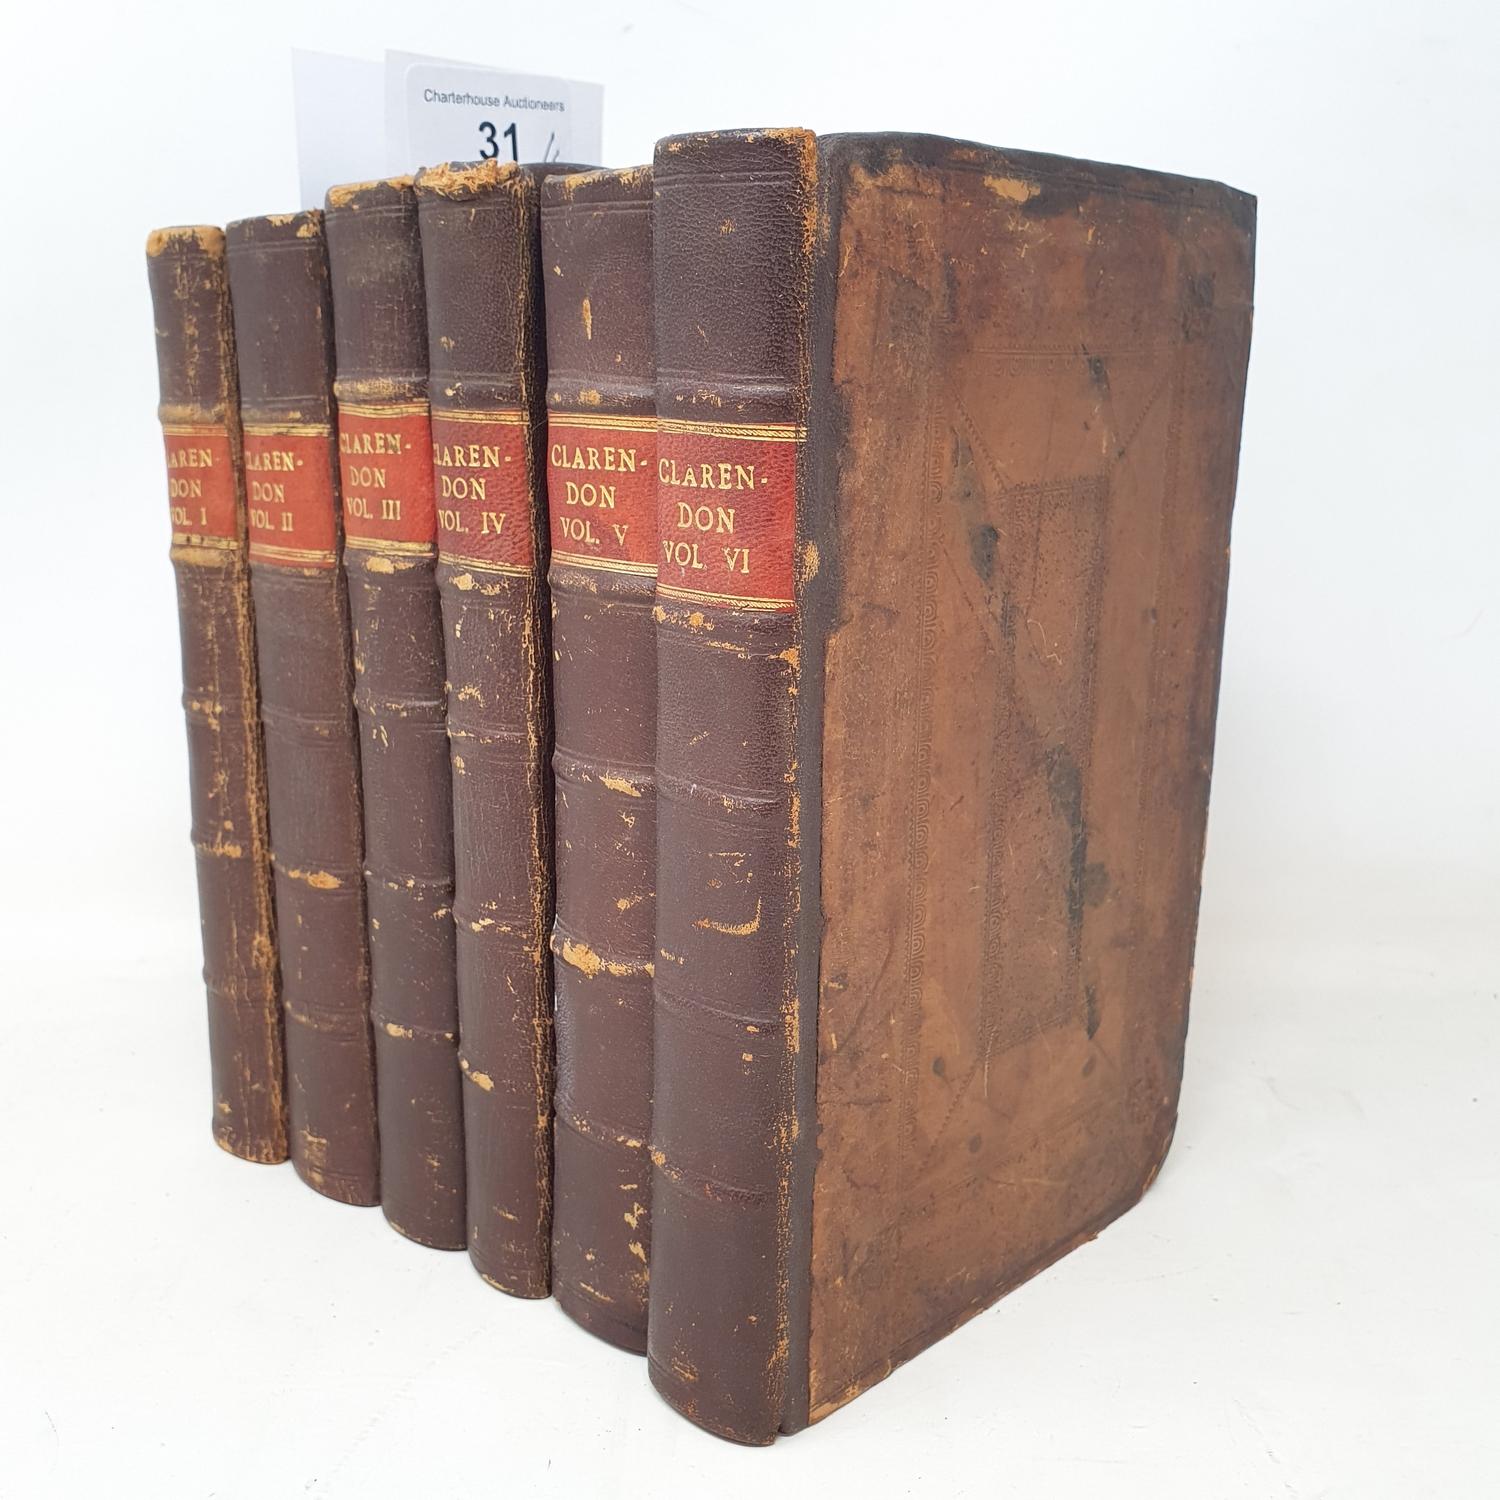 Clarendon (Edward Earl of) The History of the Rebellion and Civil Wars in England, 6 vols, 1725- - Image 2 of 3